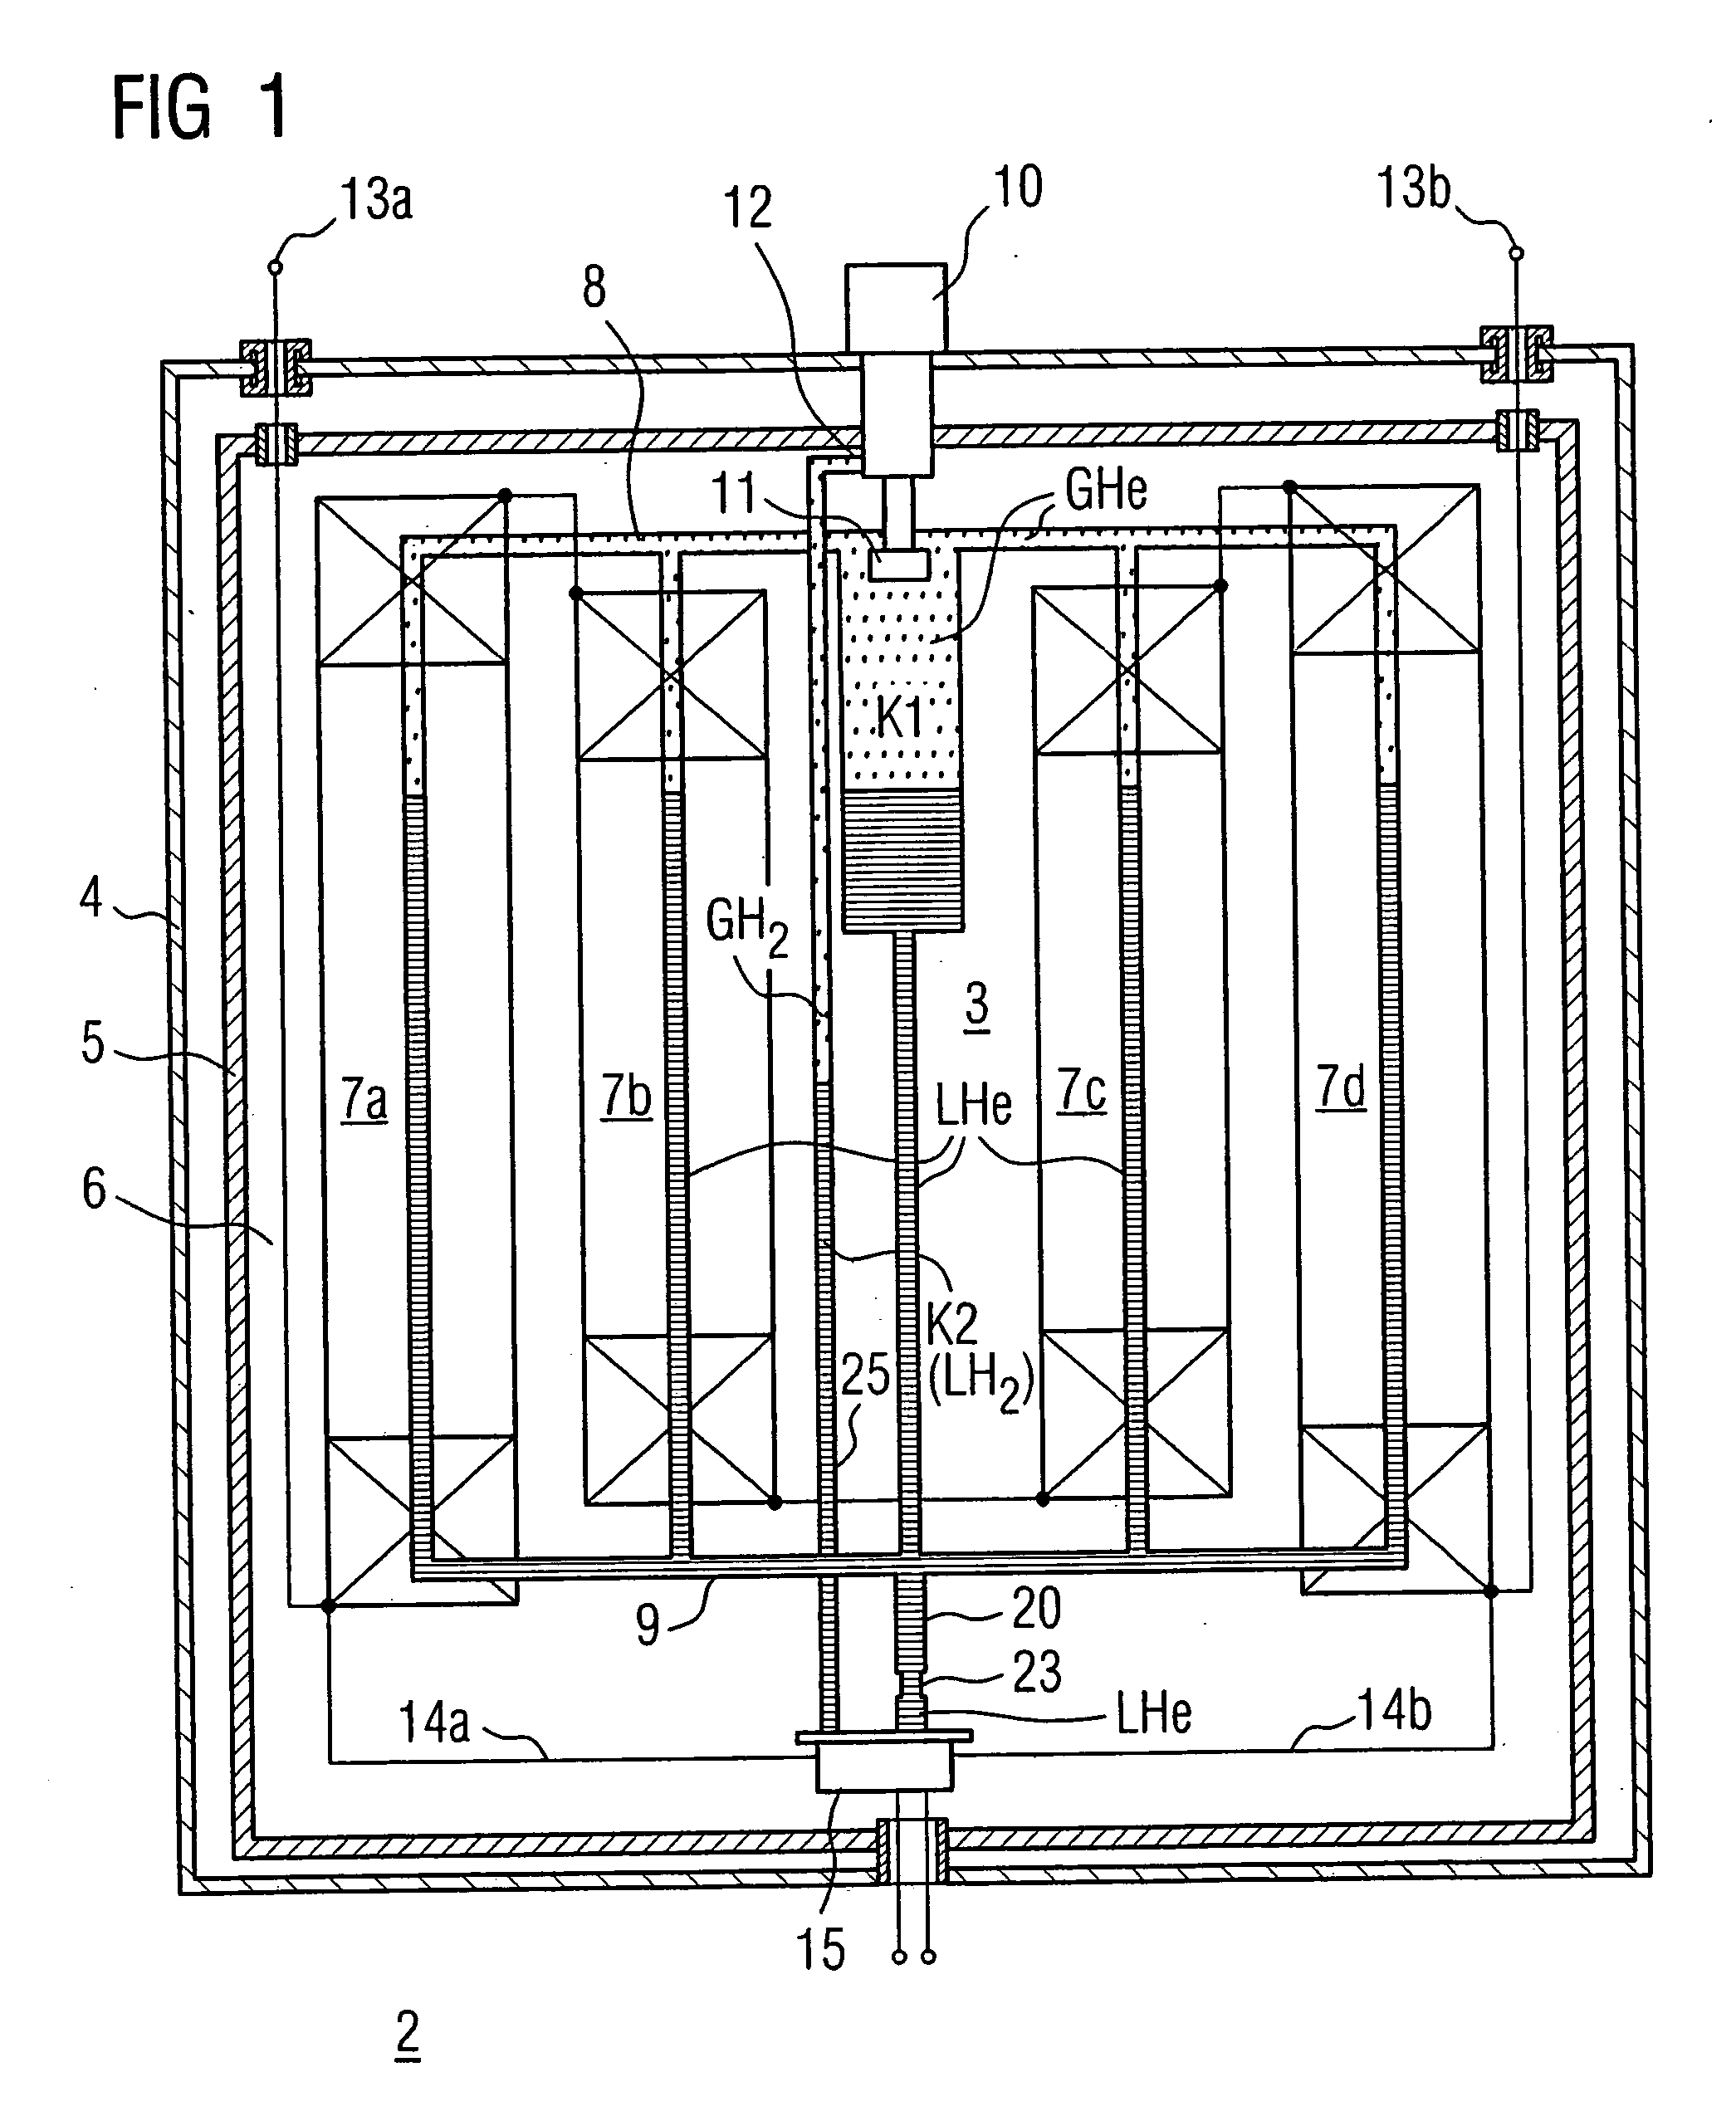 Superconducting device having a cryogenic system and a superconducting switch